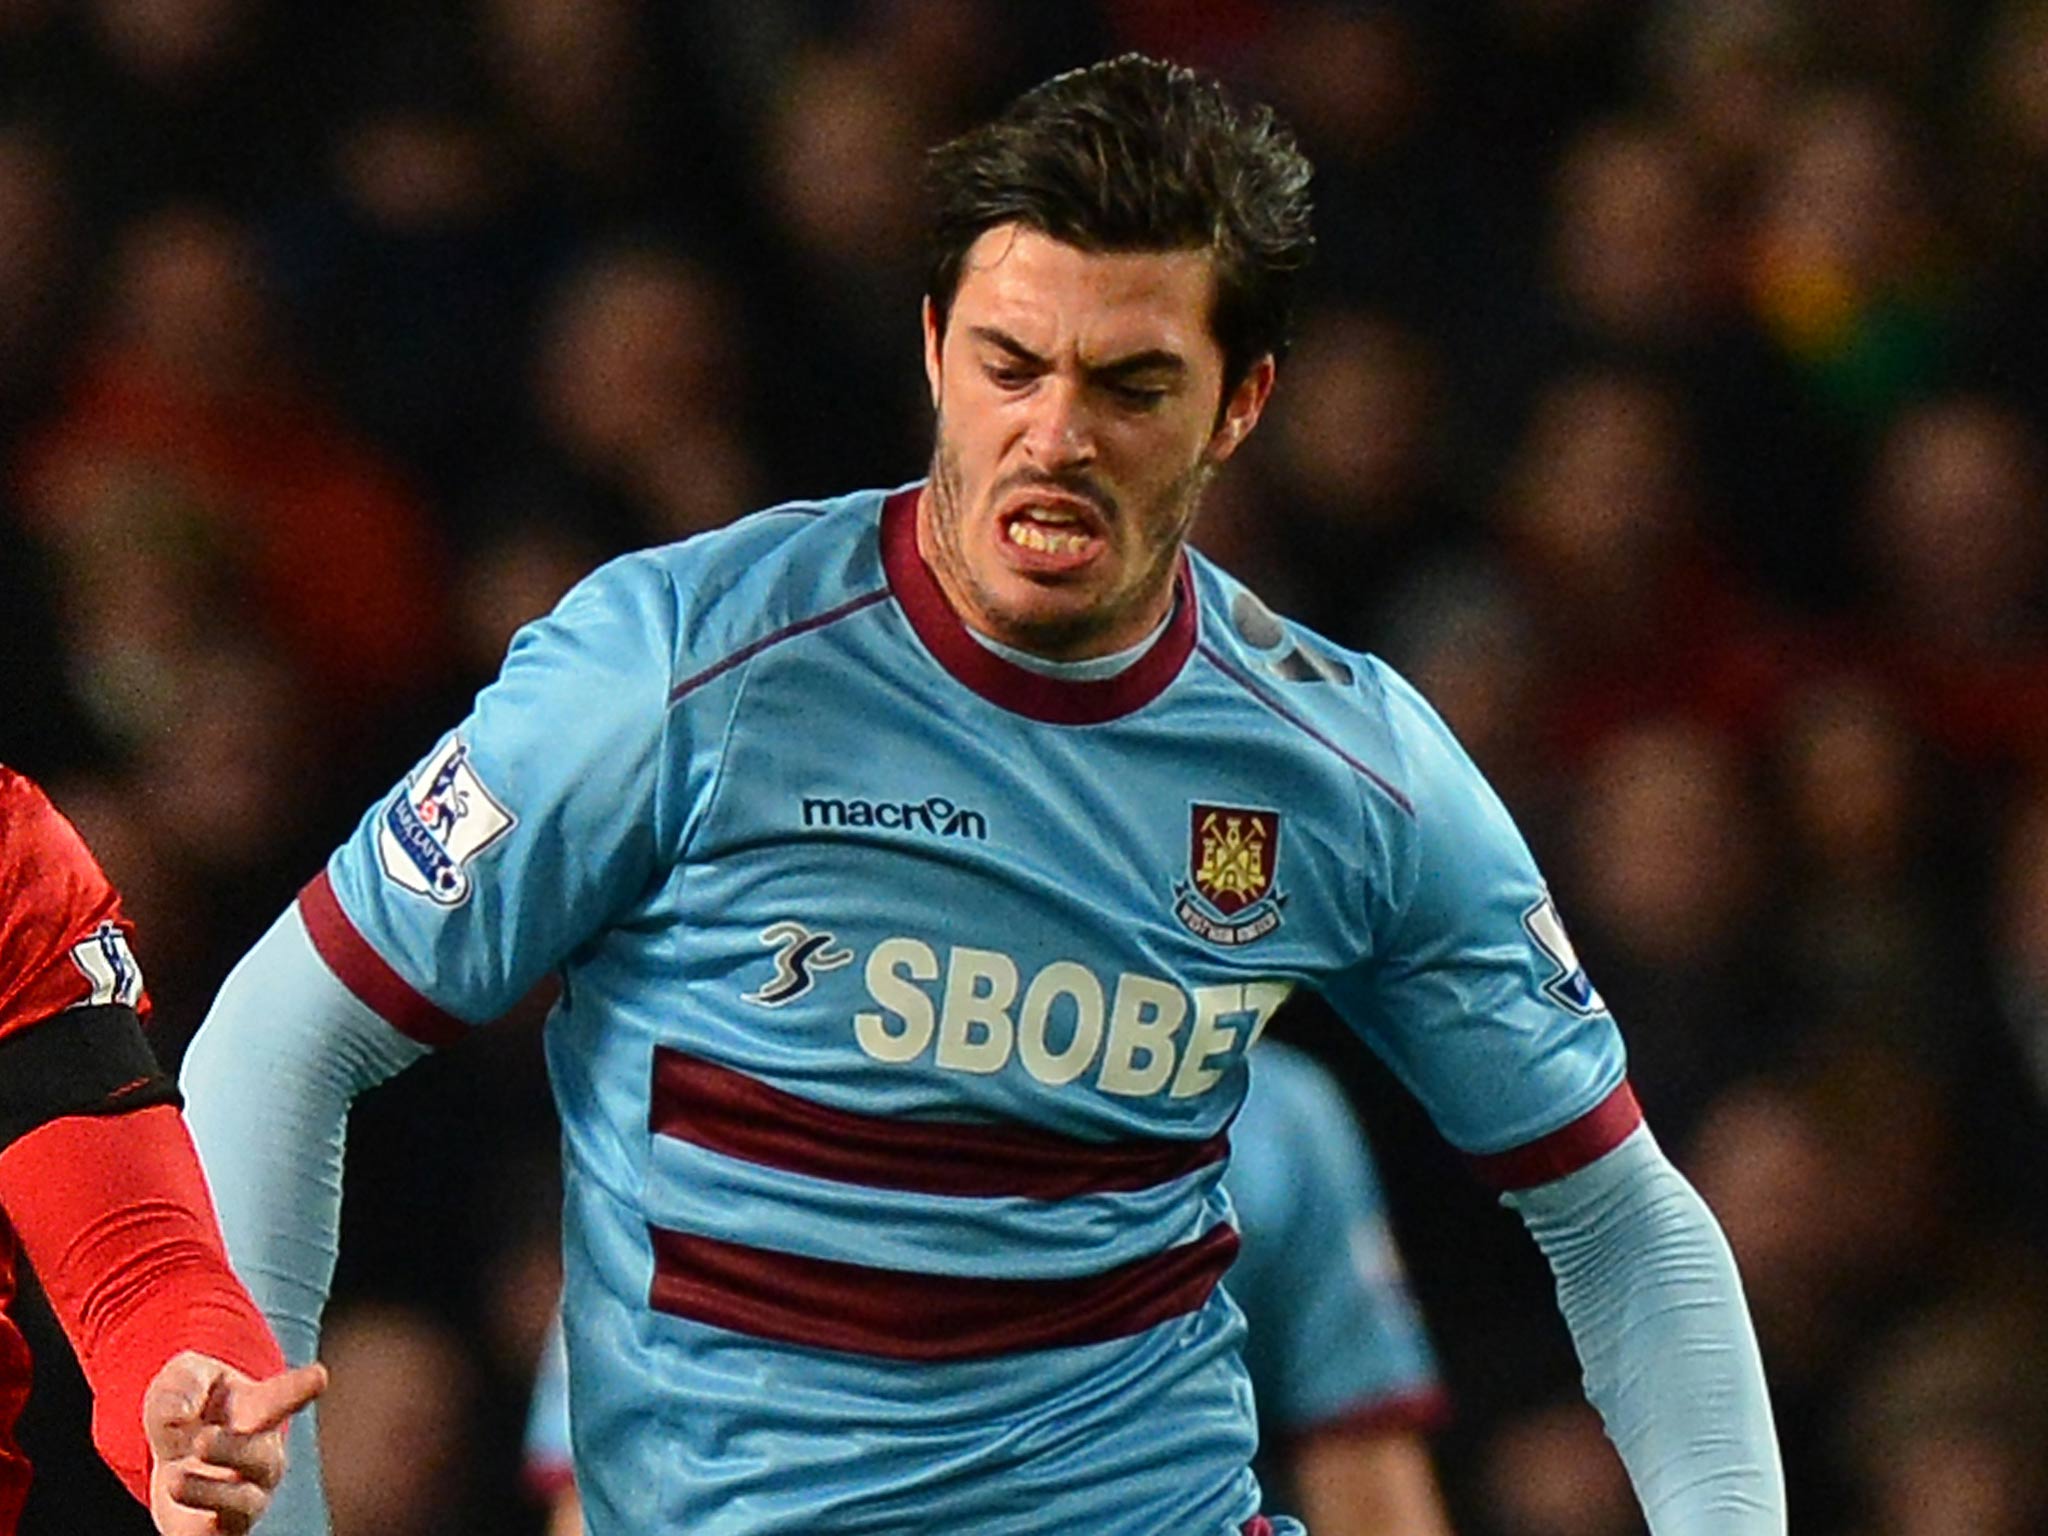 James Tomkins has been released on police bail